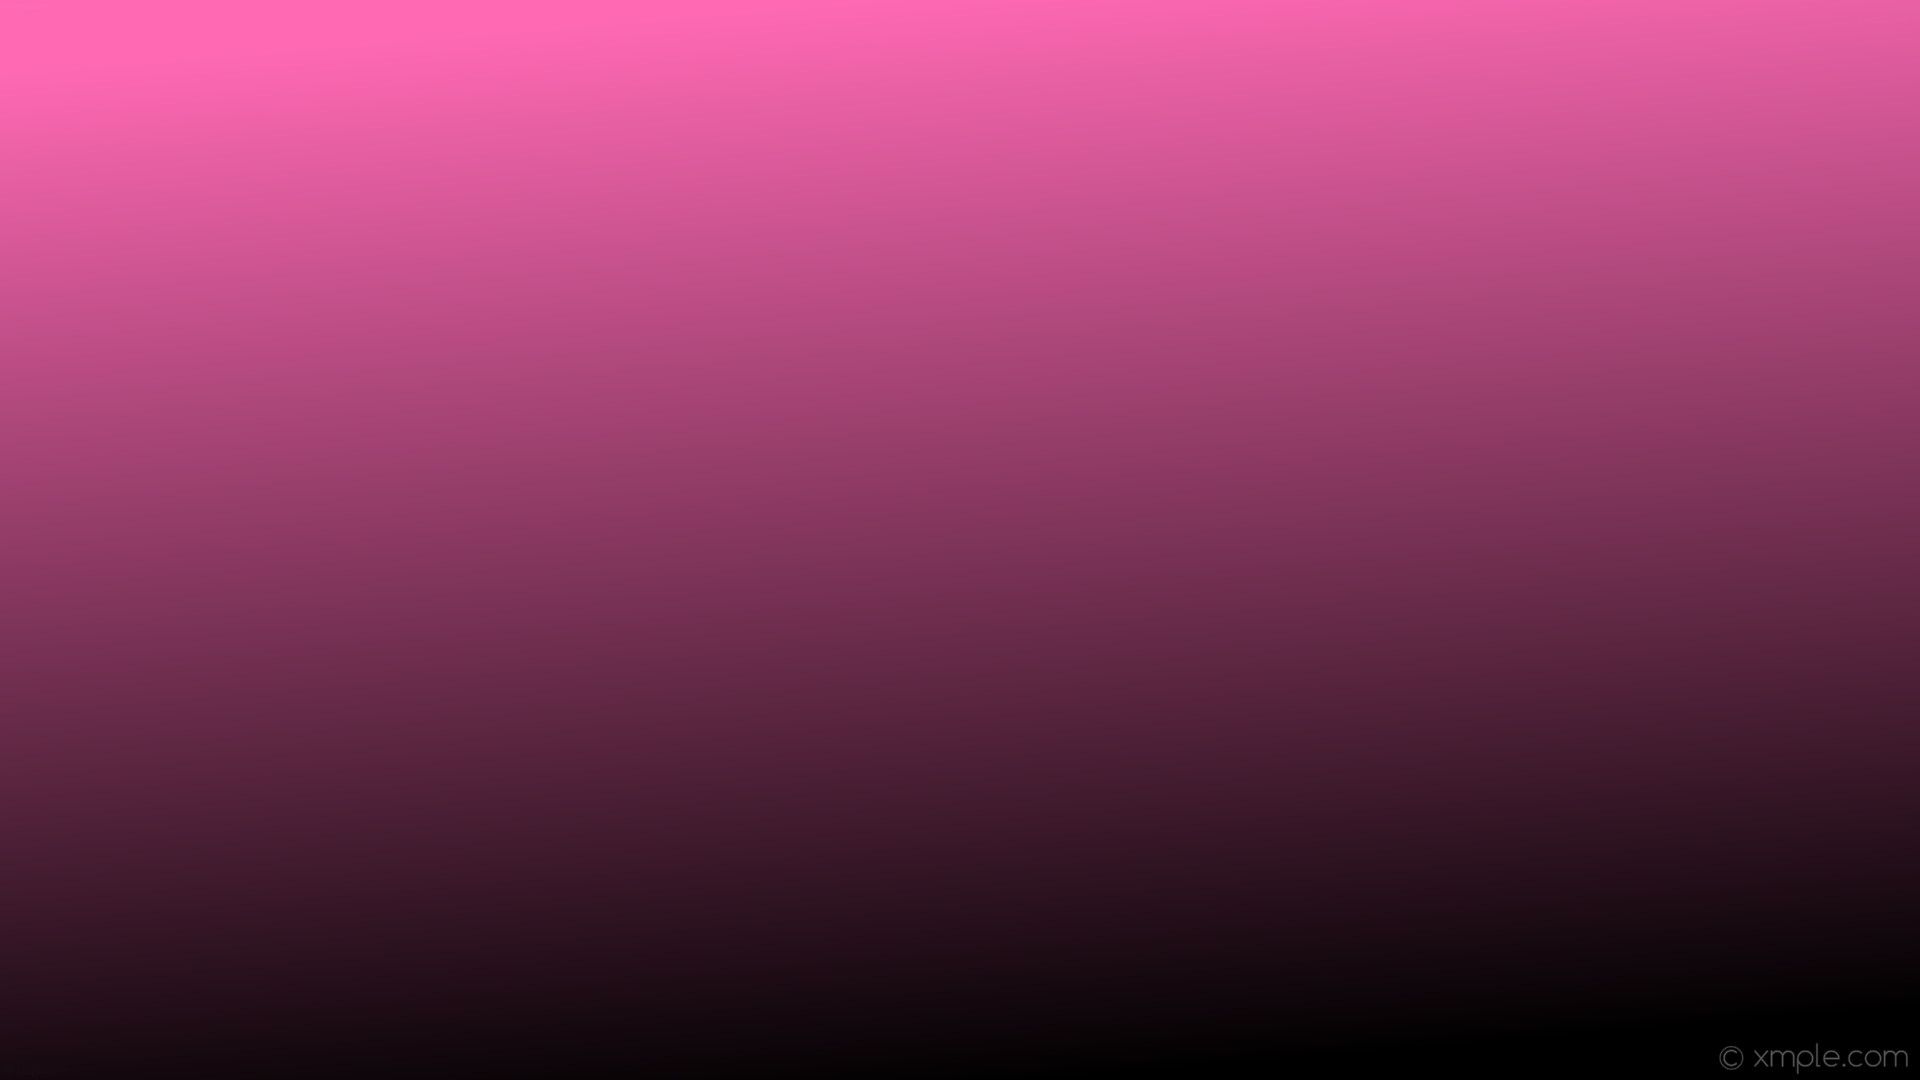 Rosa wallpaper Cute pink color HD wallpaper image picture for your iphone 5